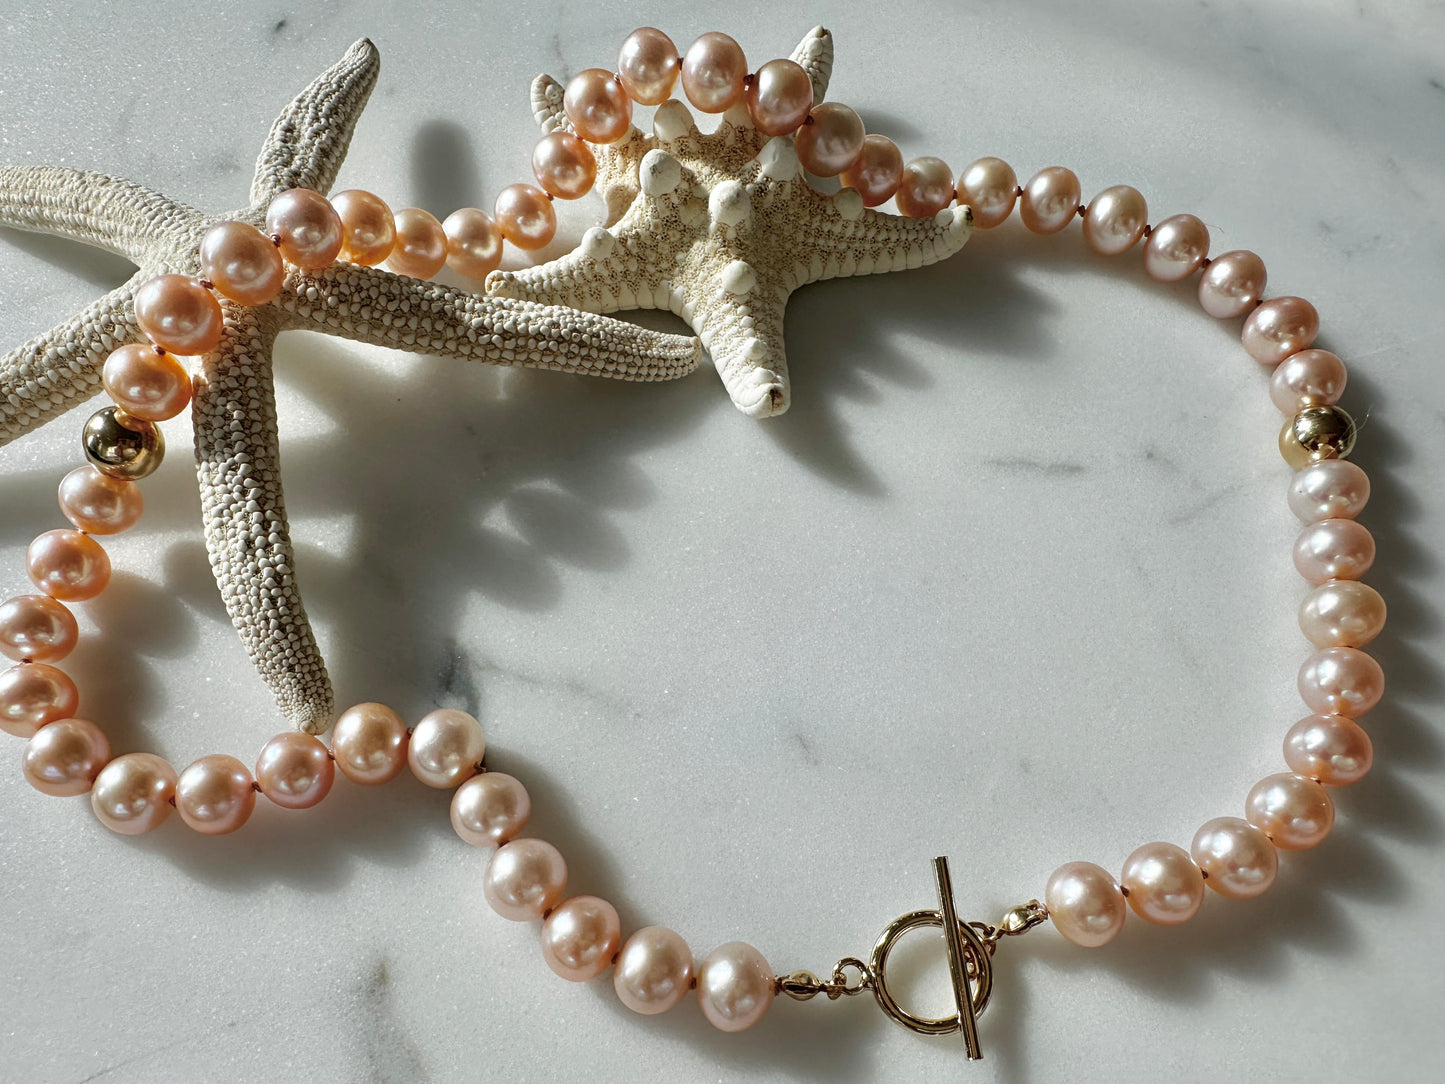 The Grace Necklace in Pink Pearl